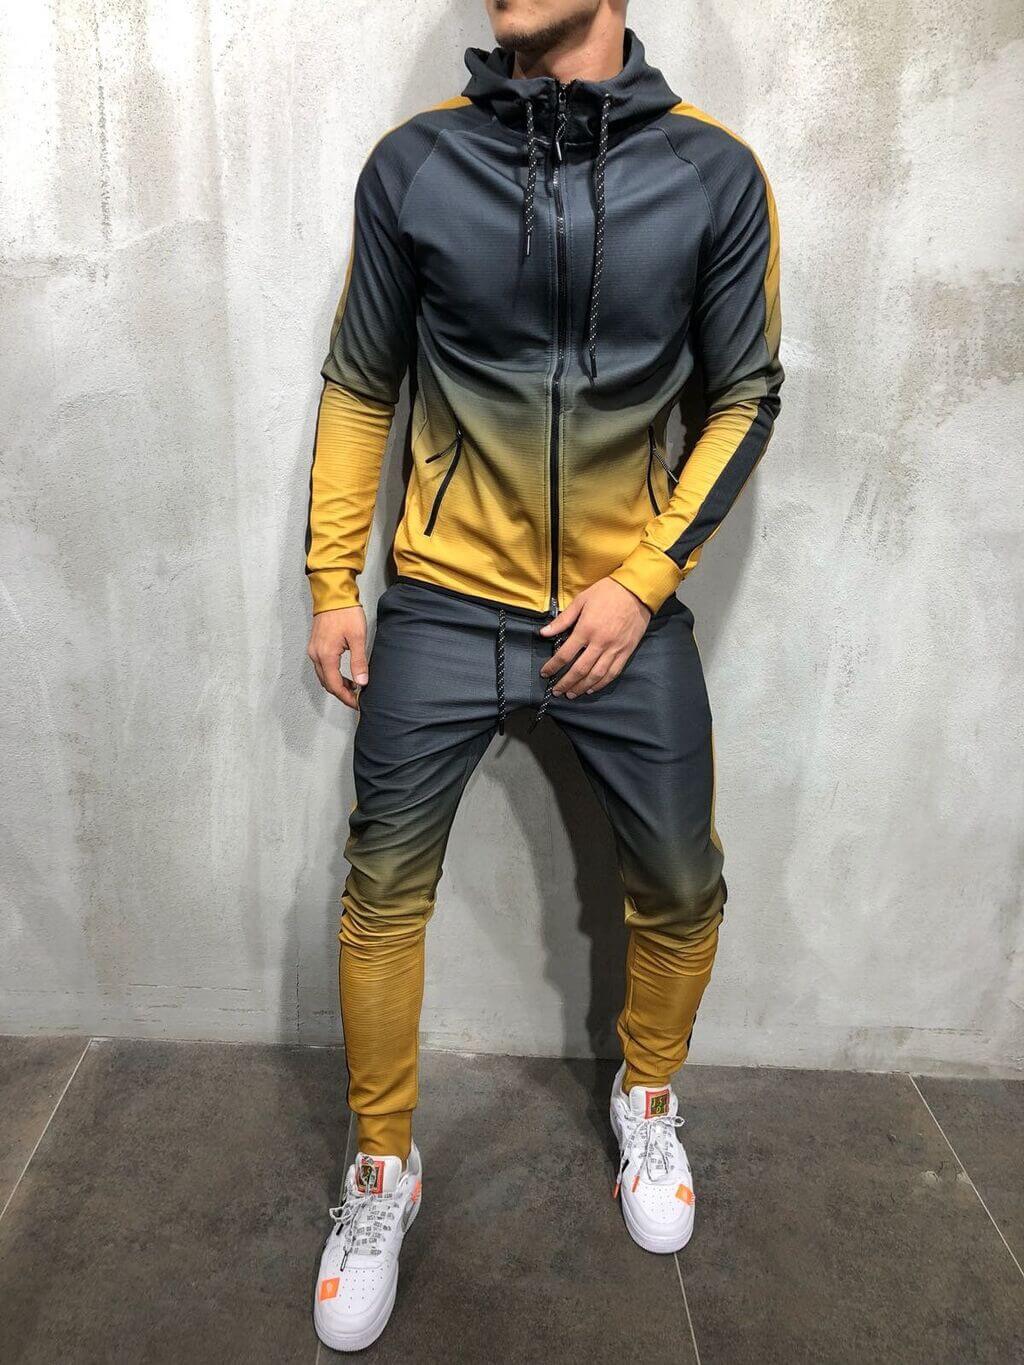 Sport Tracksuits ideas for 90s theme party outfits male